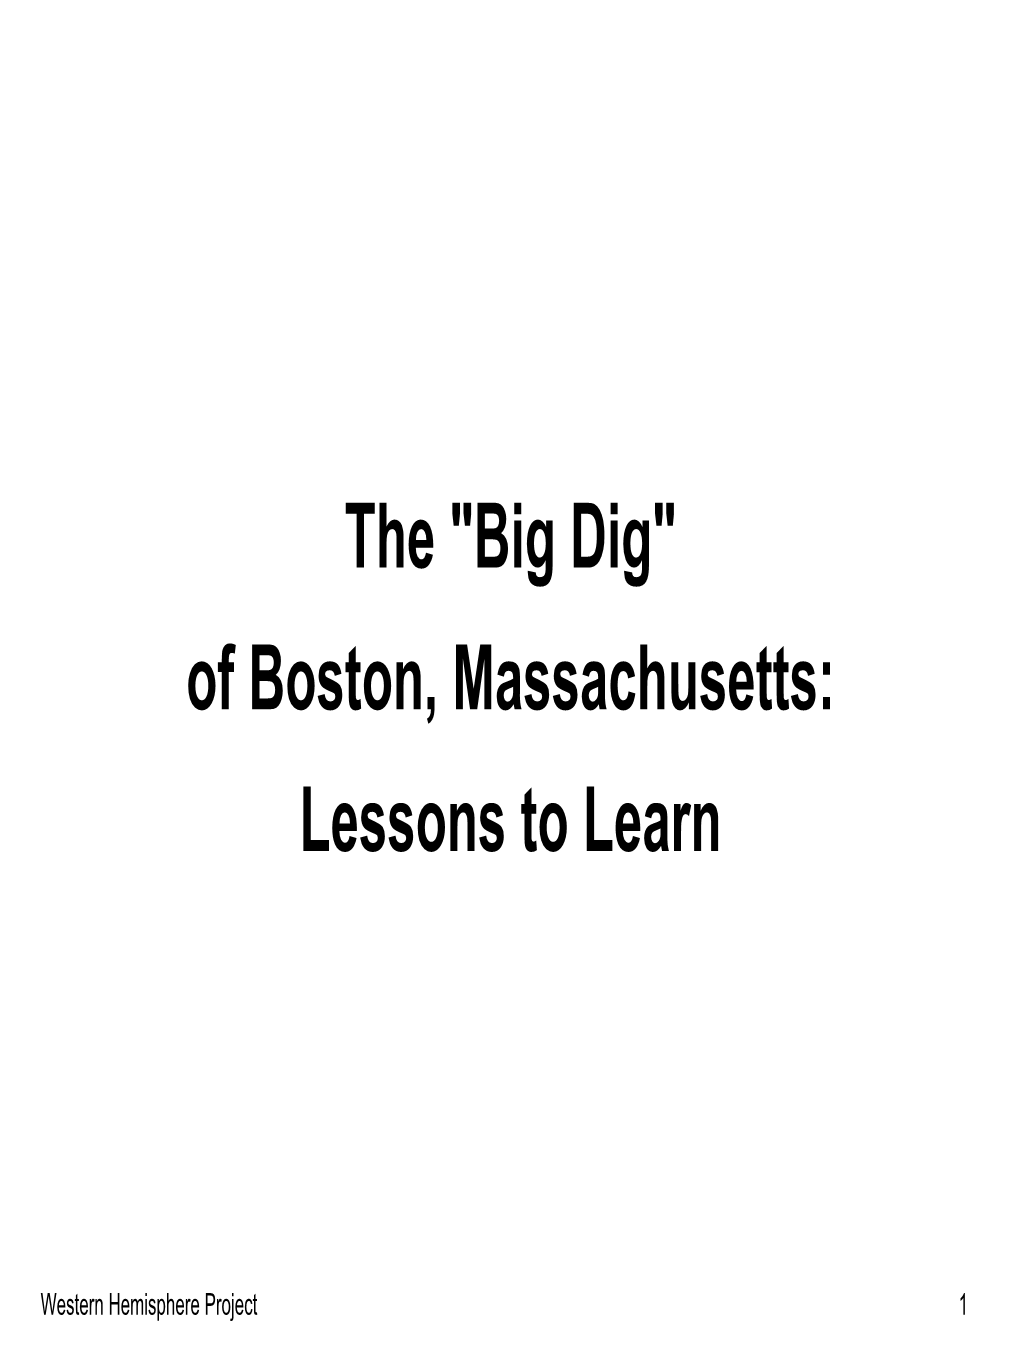 The "Big Dig" of Boston, Massachusetts: Lessons to Learn